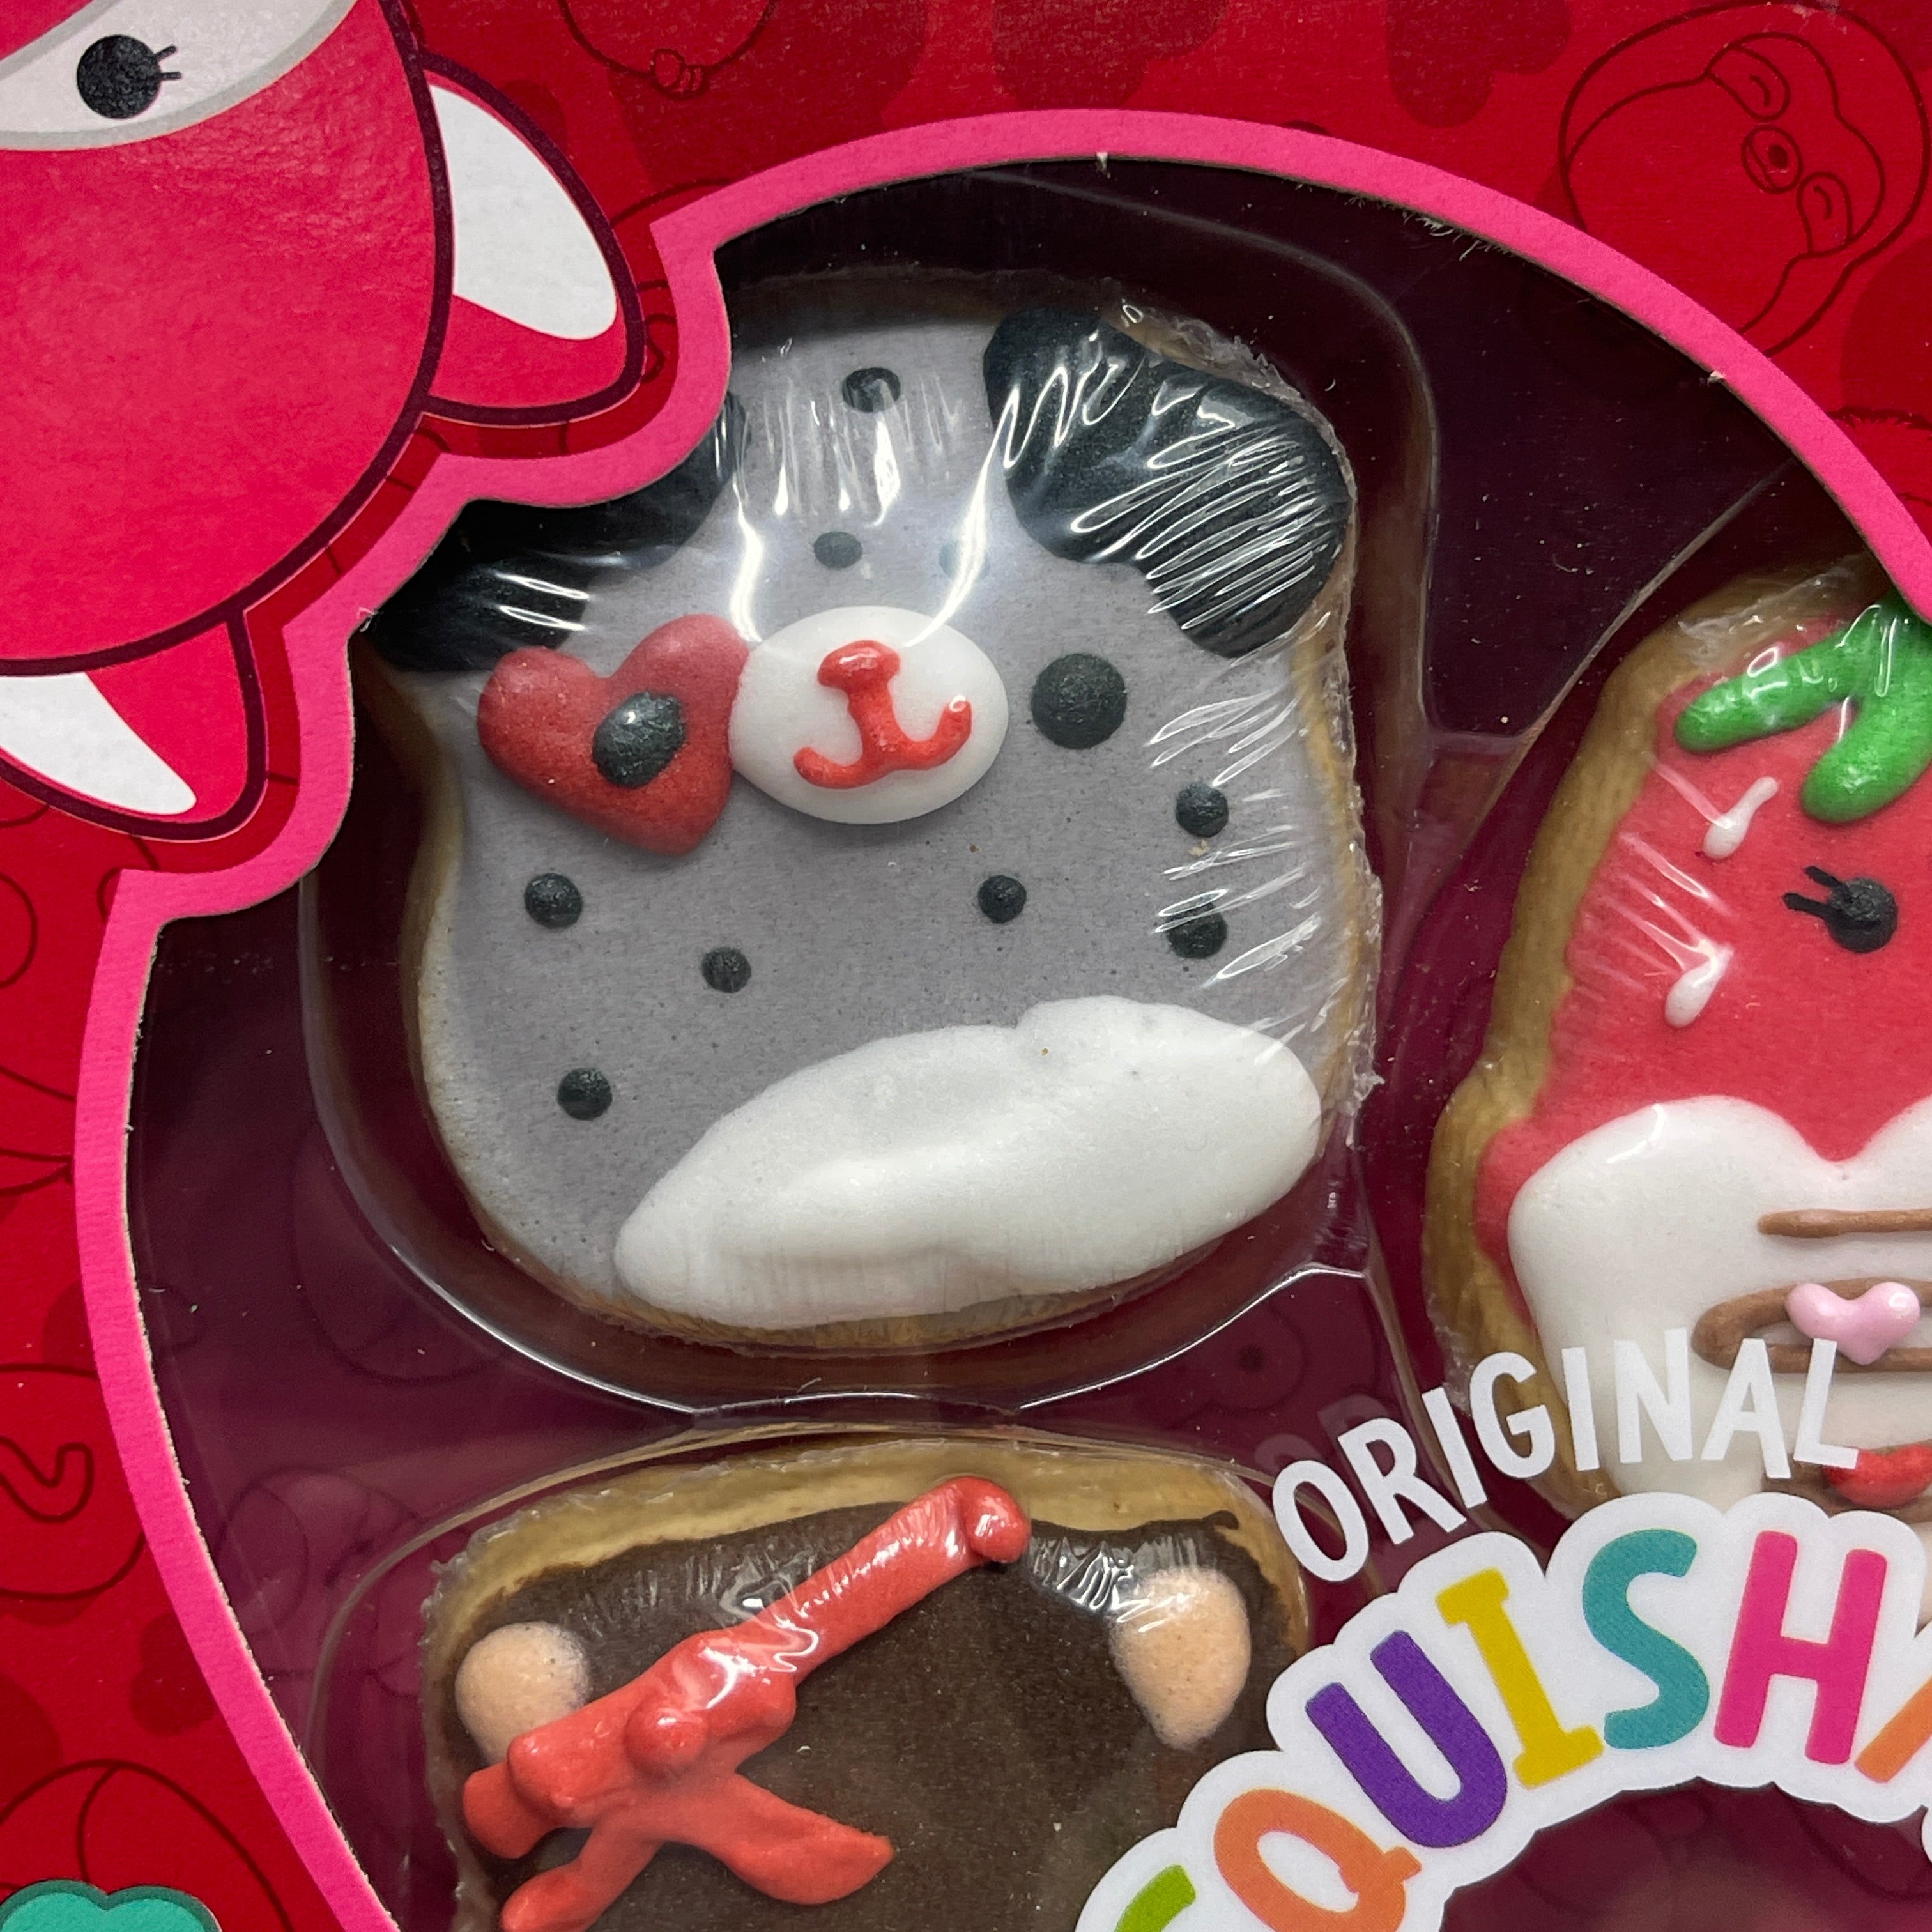 ZA@ SQUISHMALLOW (12 PACK) 6 Decorated Character Shaped Sugar Cookies 4.2 oz (08/25) A